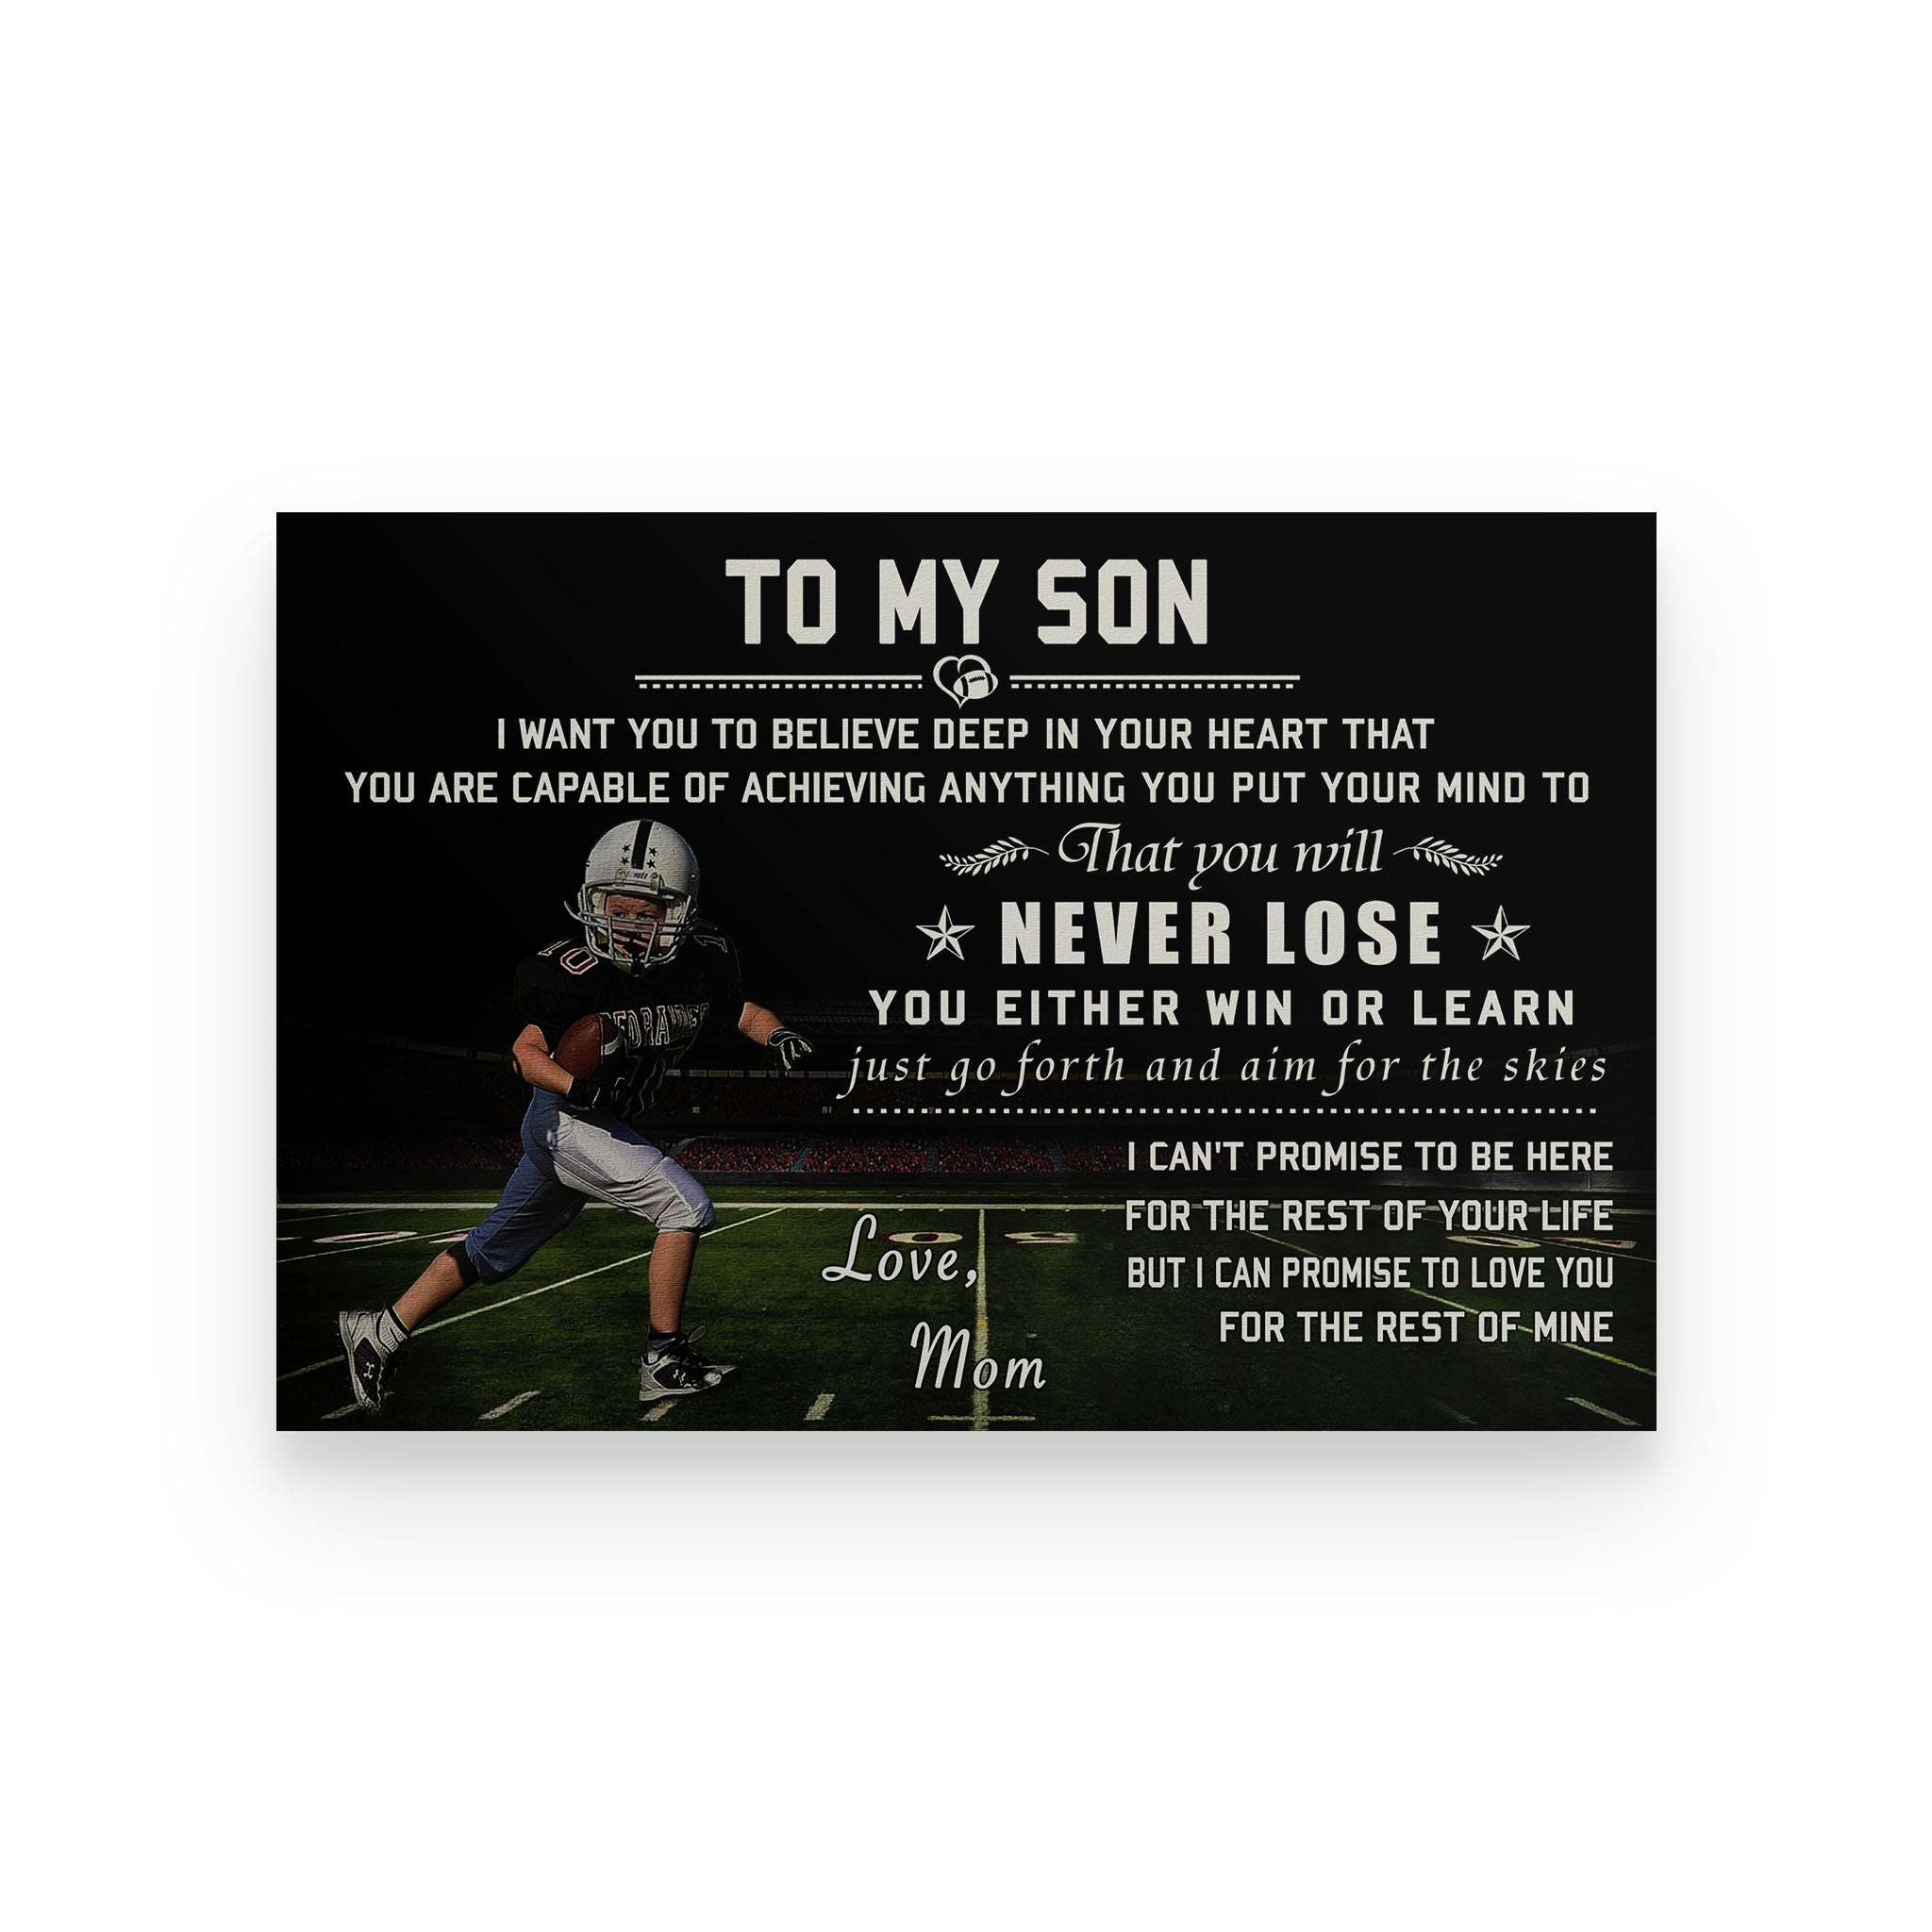 American football poster mom to son I want you to believe deep in your heart vs3